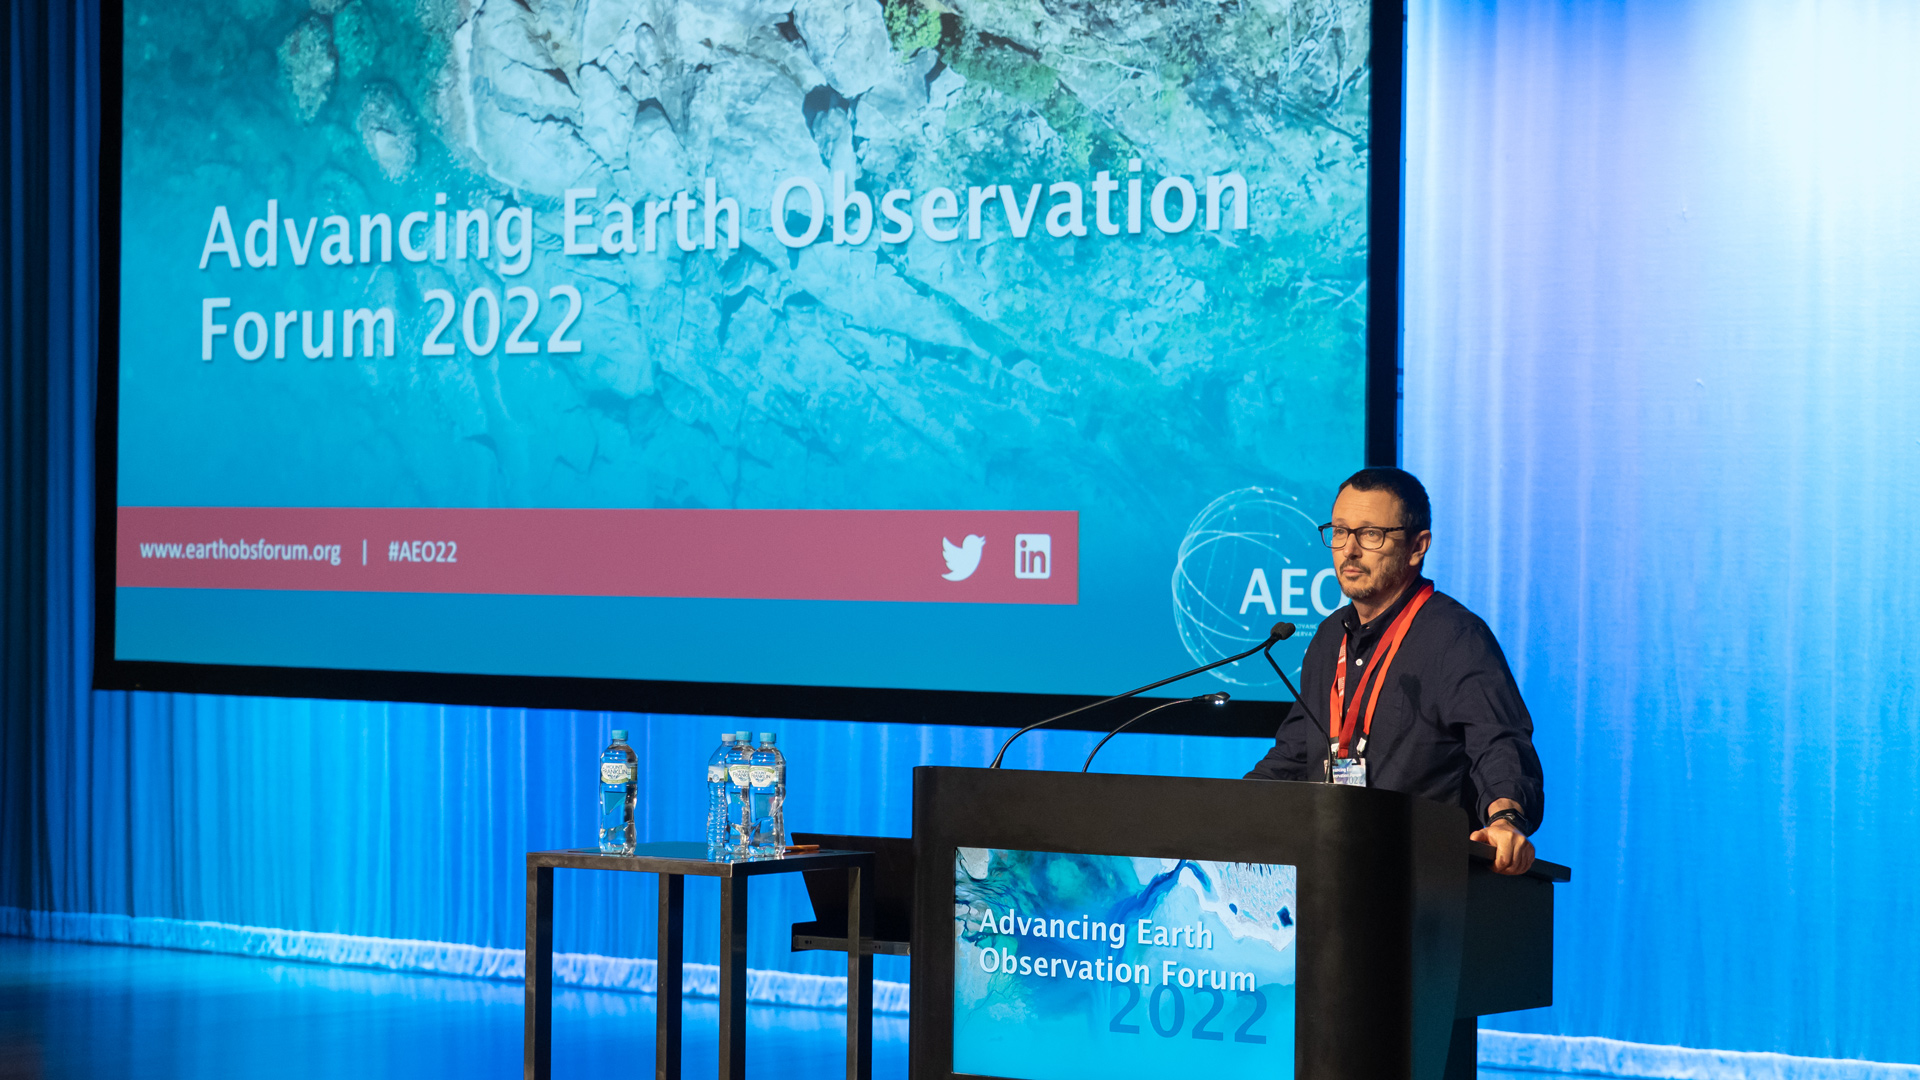 Advancing Earth Observation Forum 2022